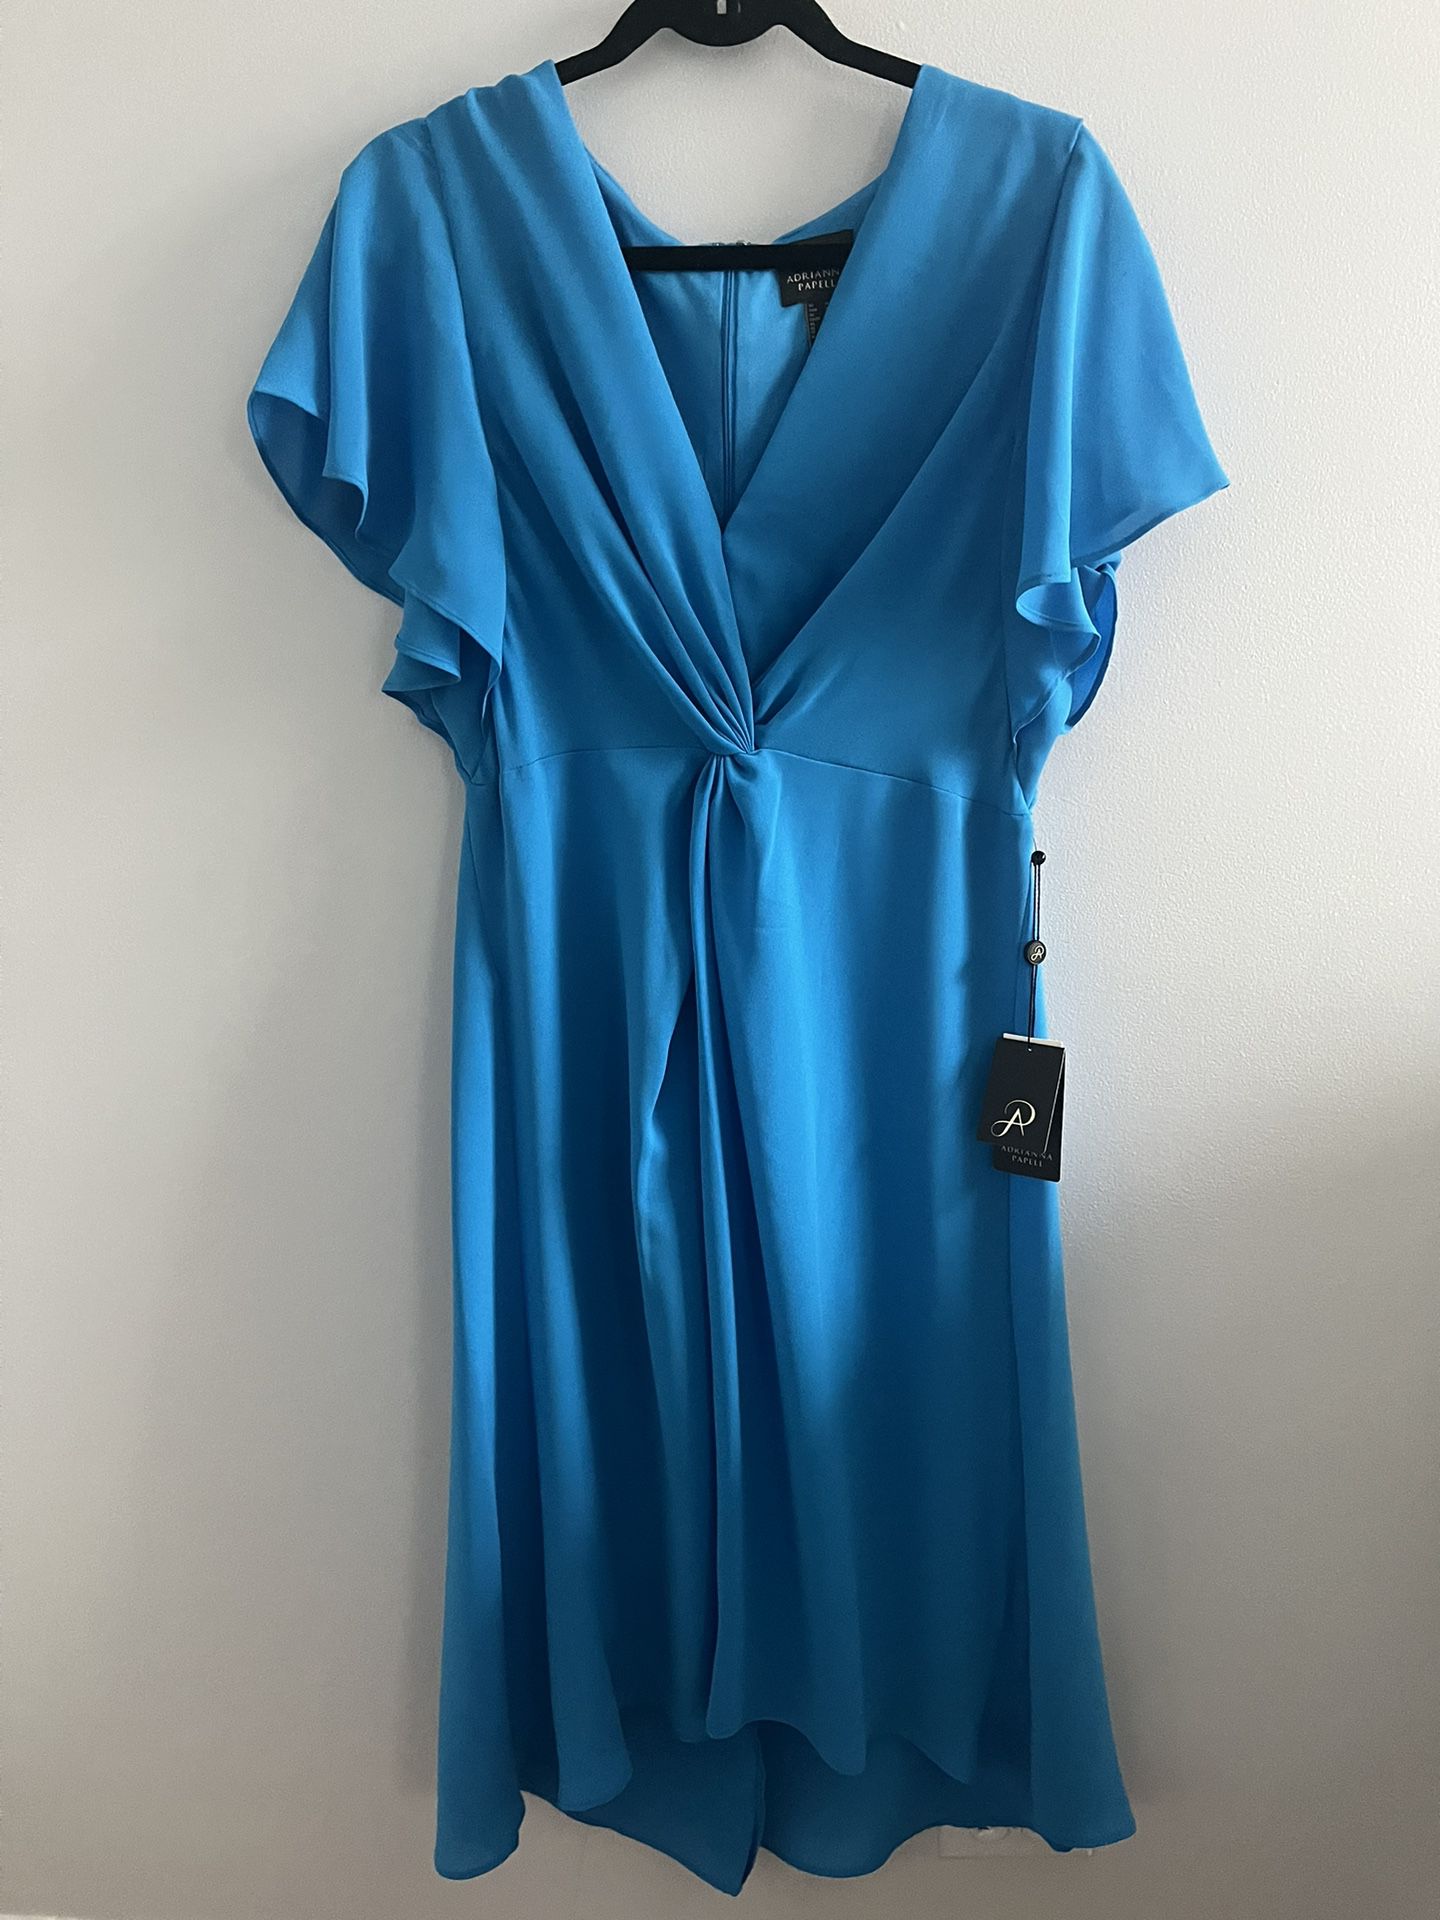 Adrianna Papell Blue High Low Dress NWT Size 14